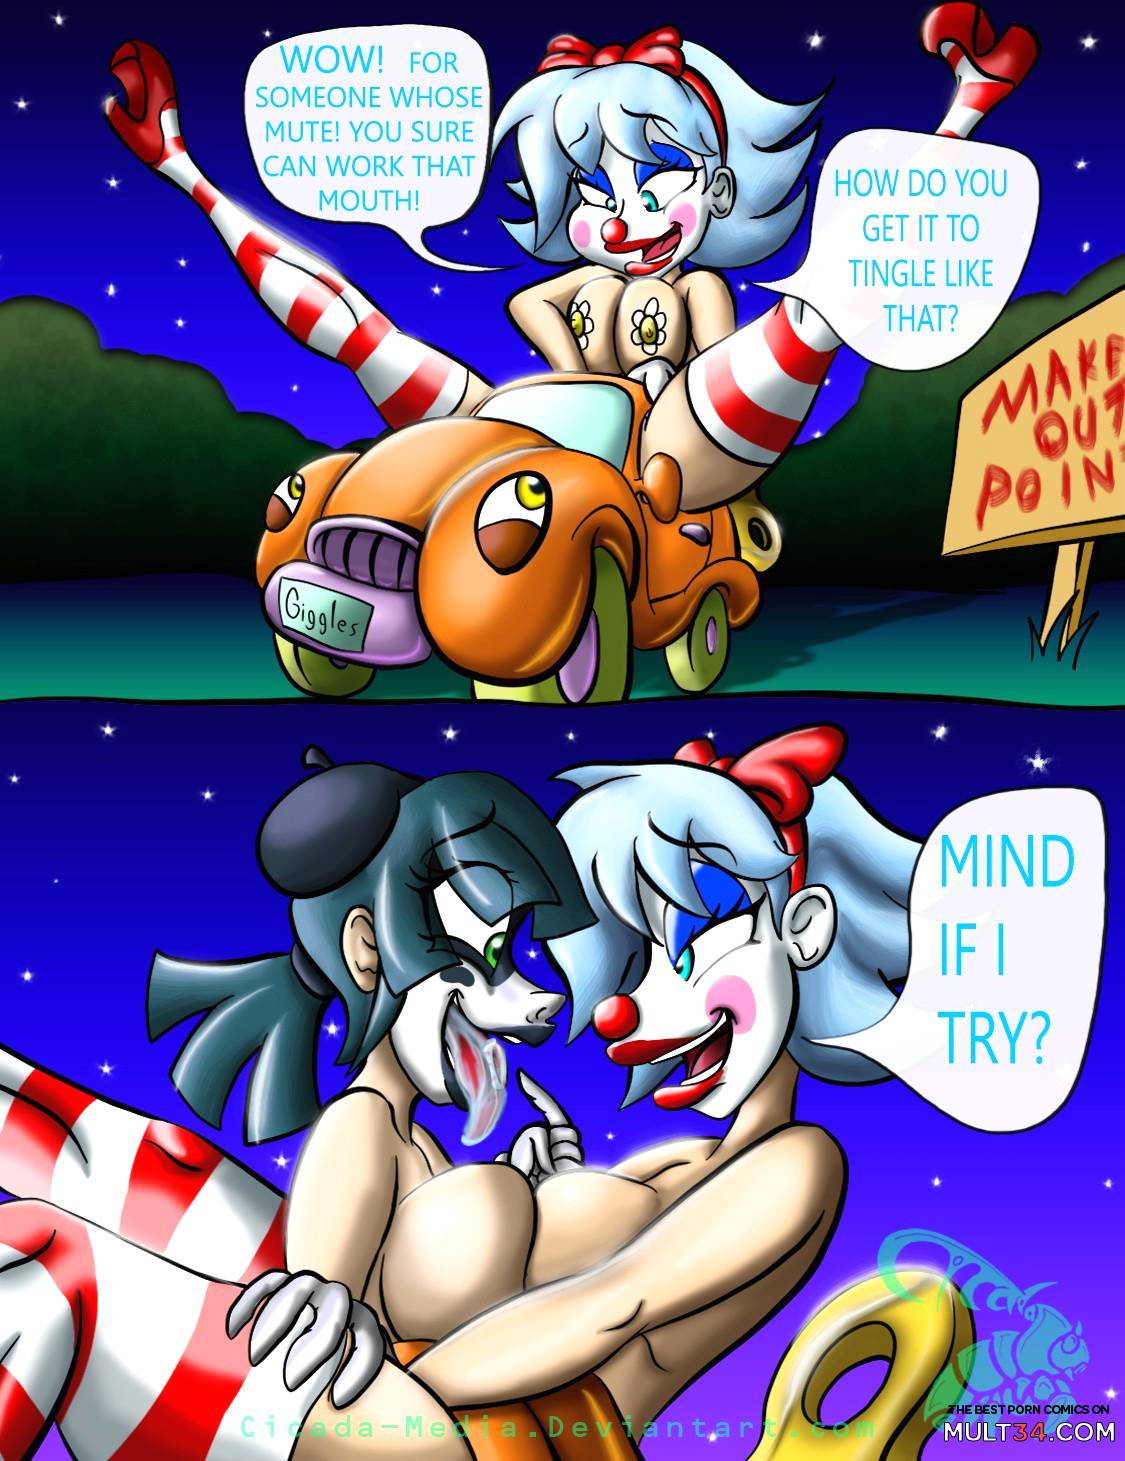 Giggles The Slutty Clown page 22